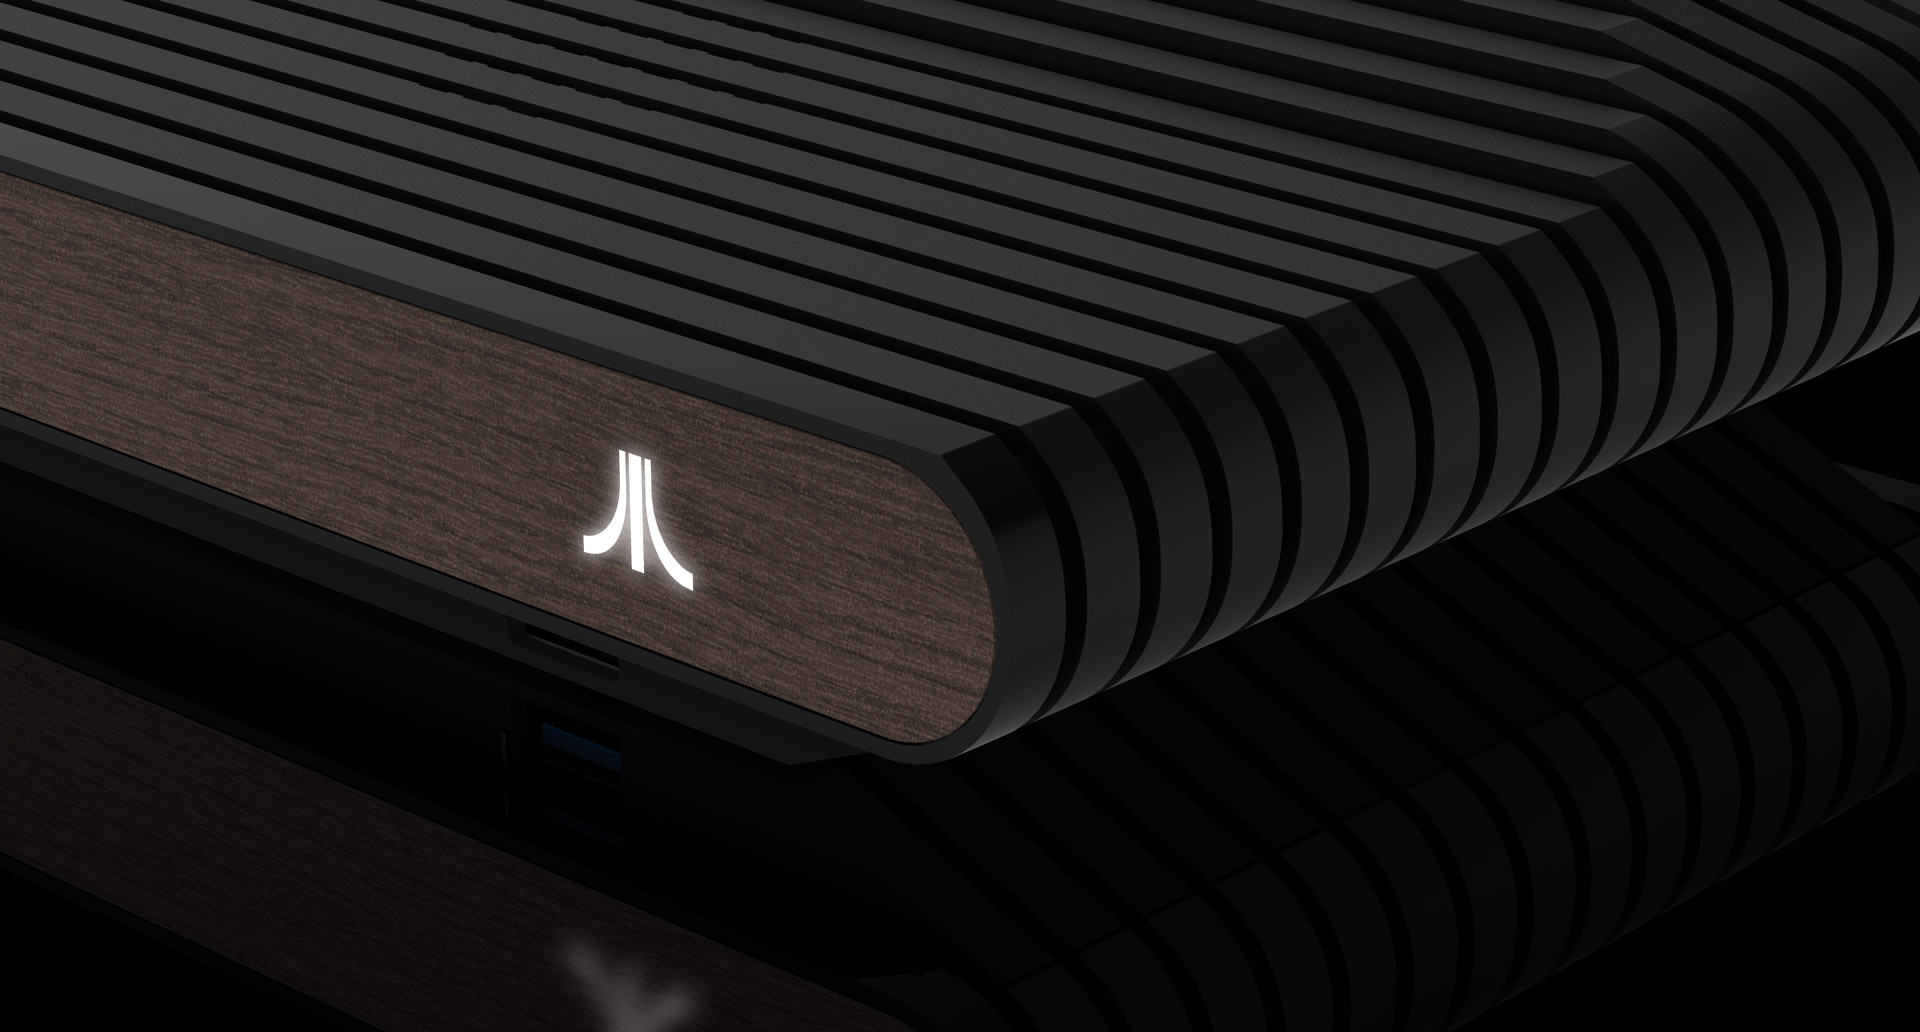 The Linux-based Atari VCS system.